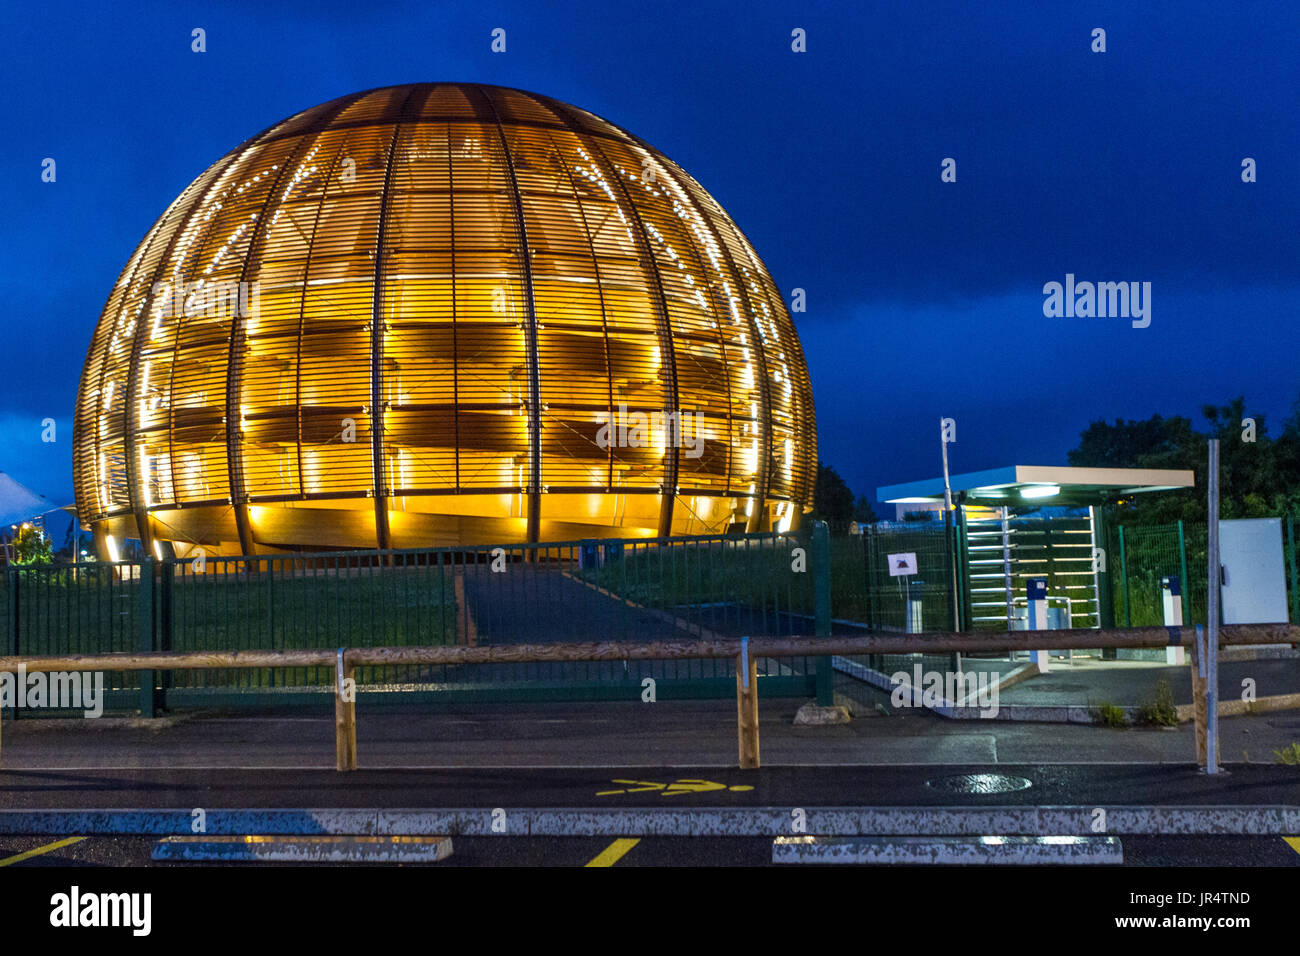 GENEVA, SWITZERLAND - JUNE 8, 2016: The Globe of Science & Innovation in CERN research center, home of Large Hadron Collider (LHC), buld for test theo Stock Photo